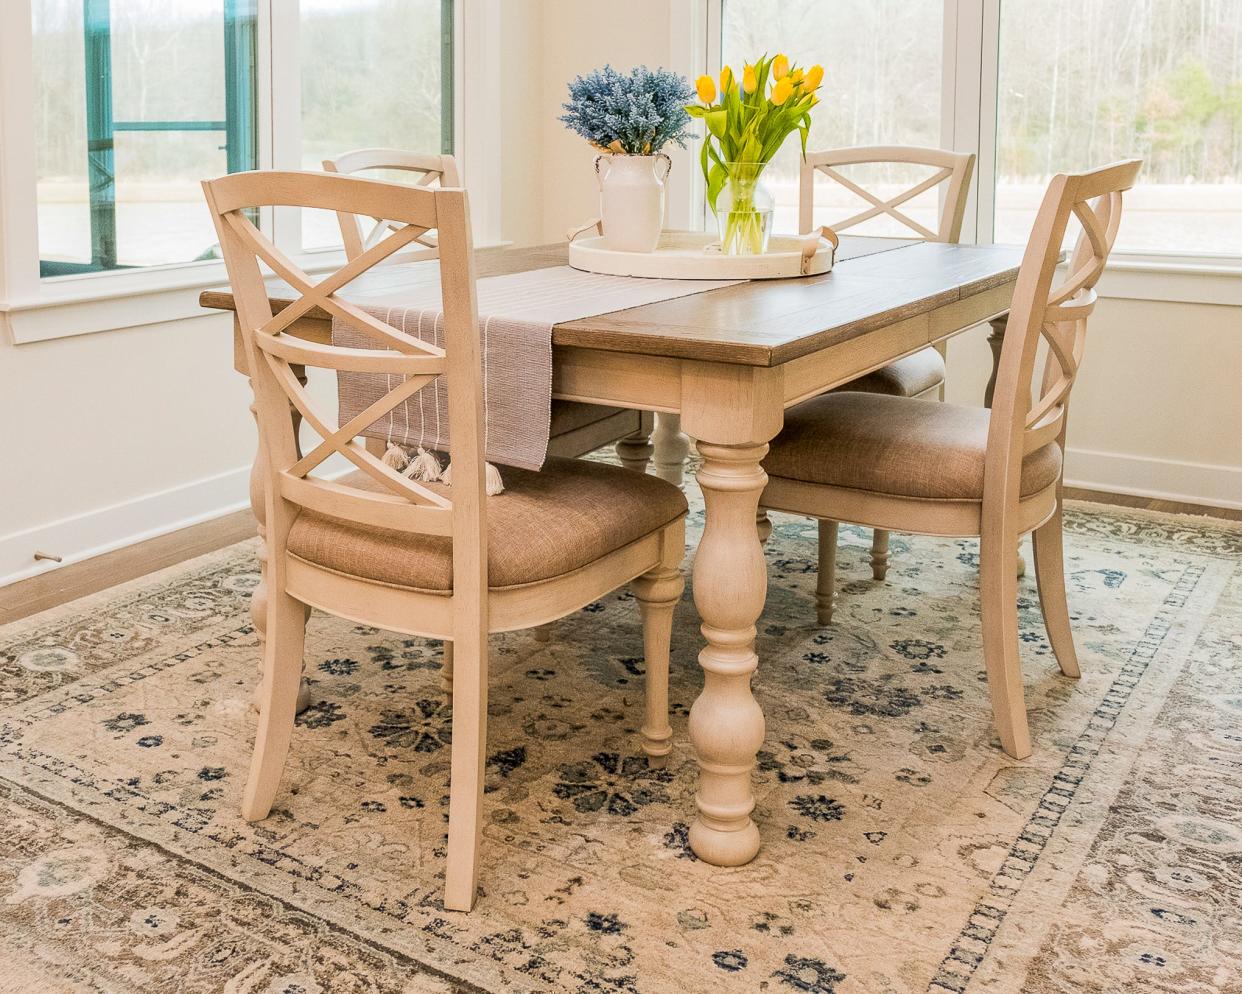 The breakfast nook is a great place to have a meal.